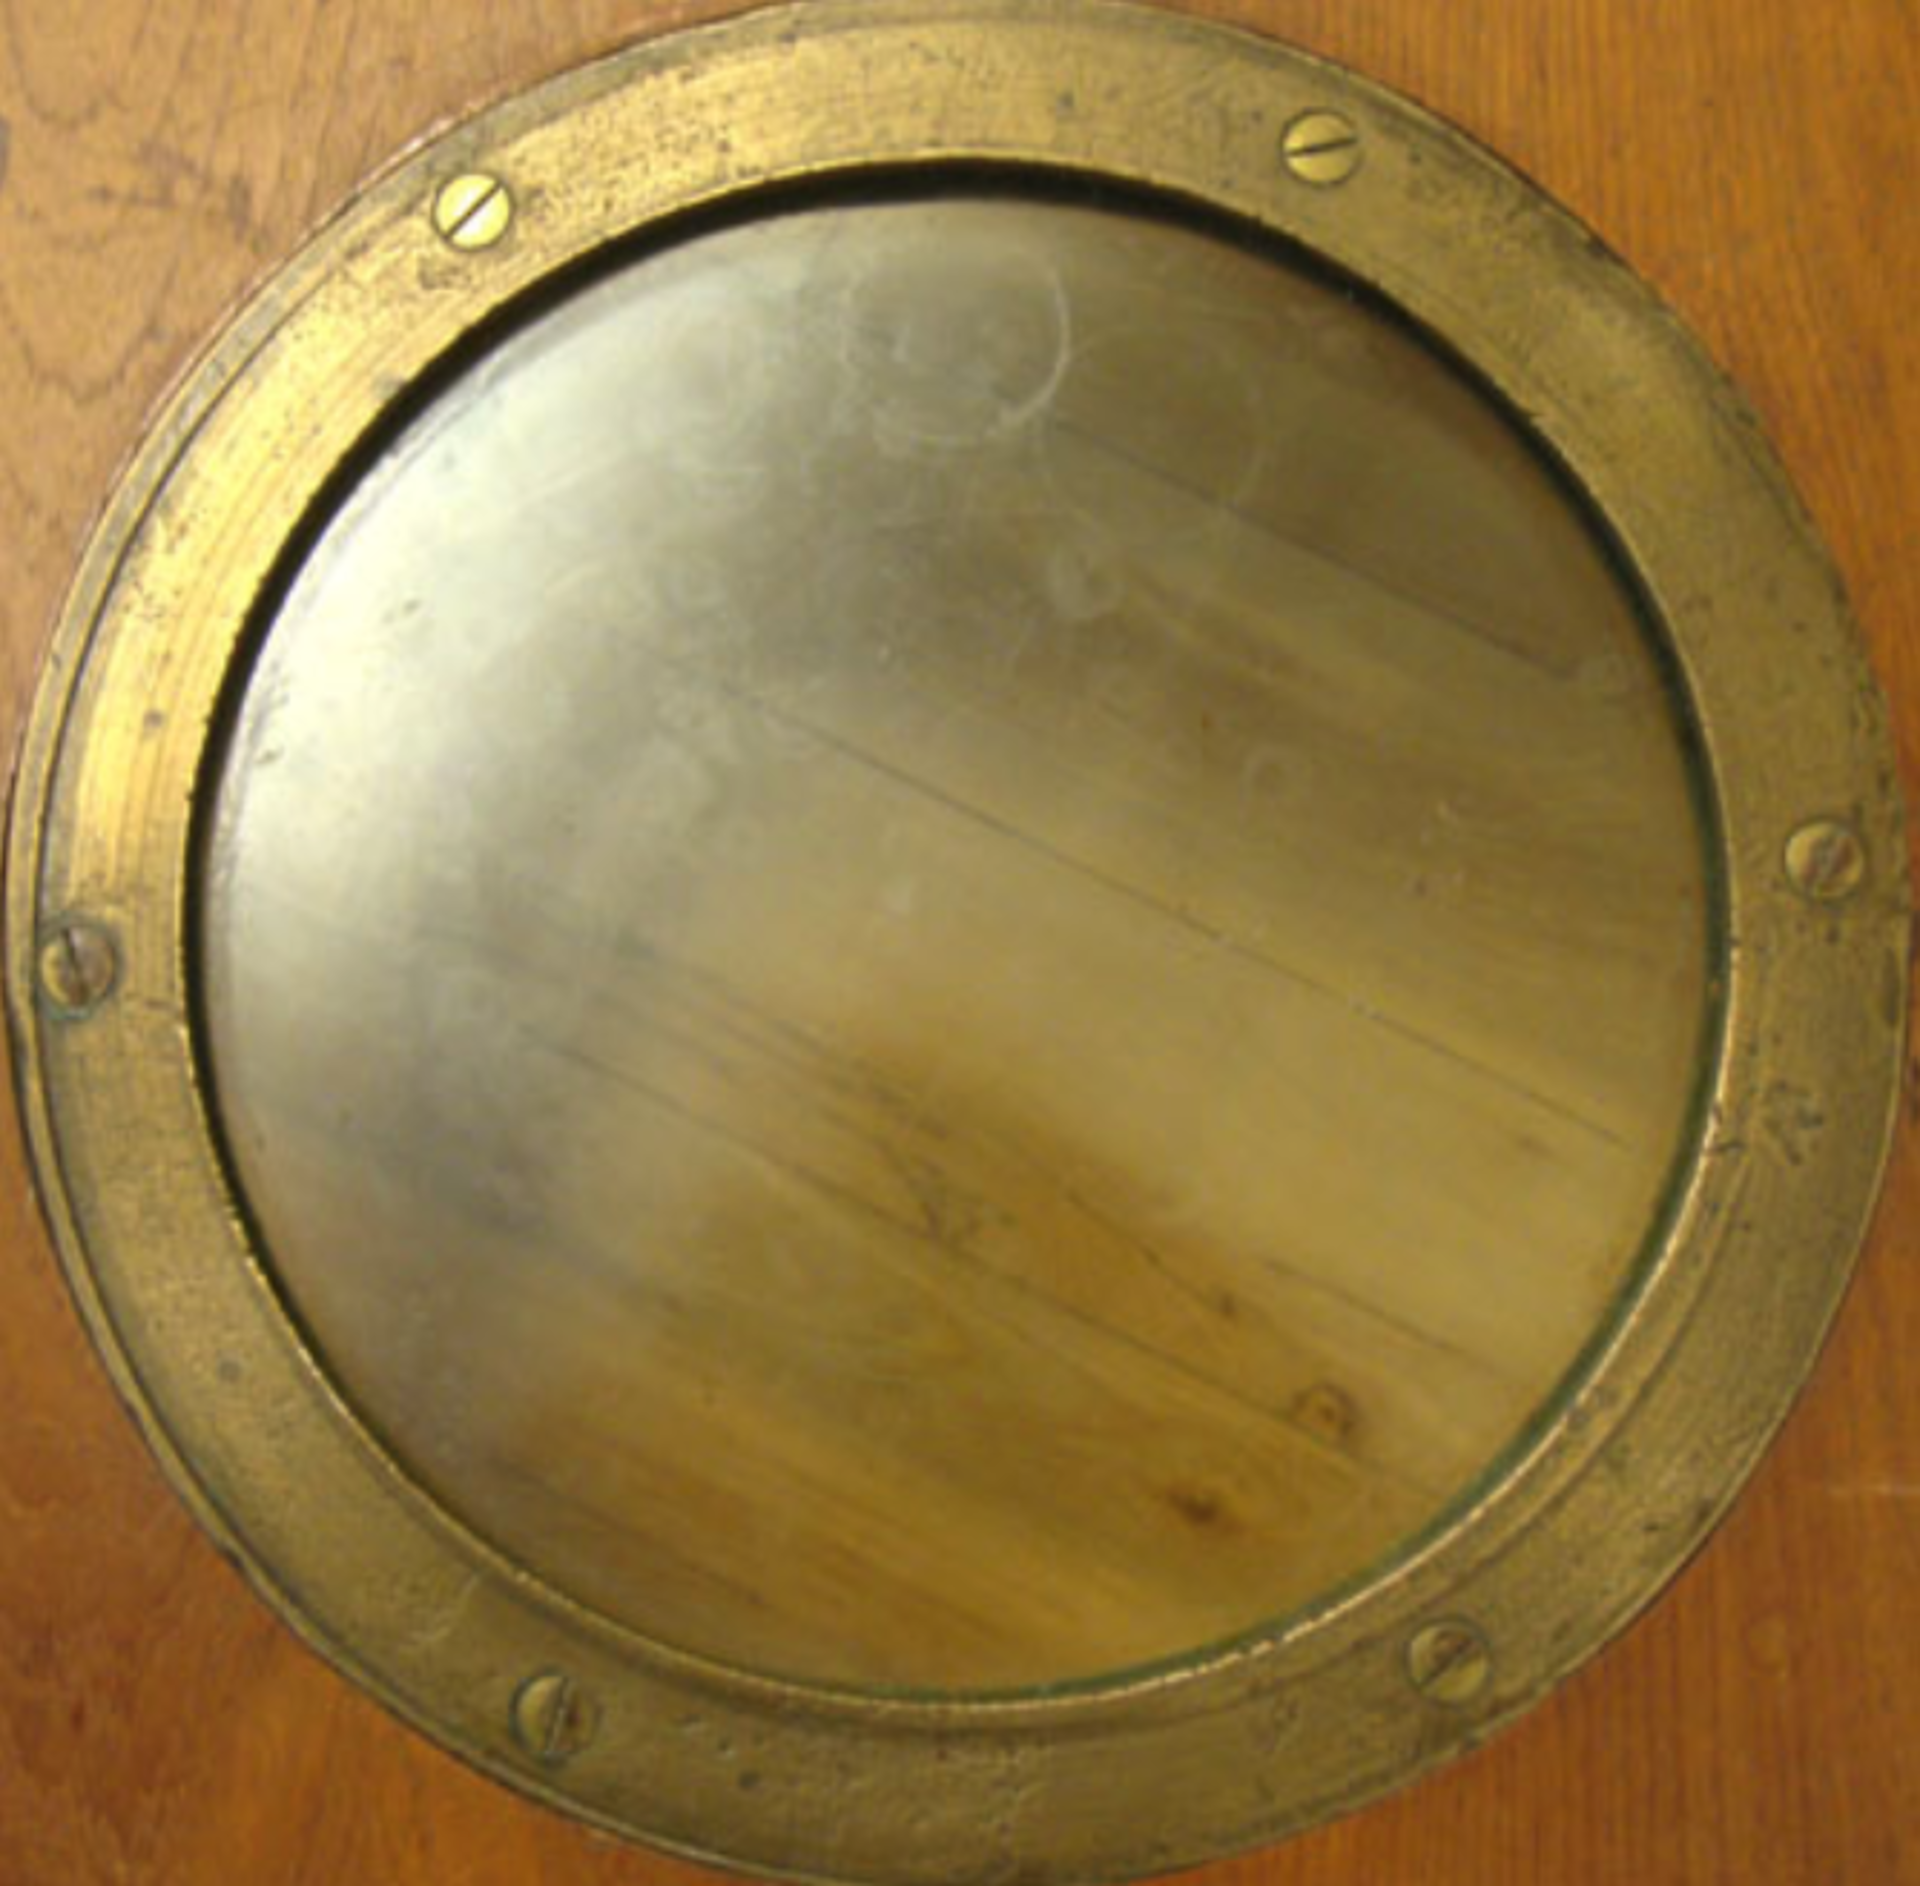 SS Catilian Porthole Rim Recovered From Scapa Flow With Porthole Glass From SMS Kronprinz Wilhelm - Image 2 of 3